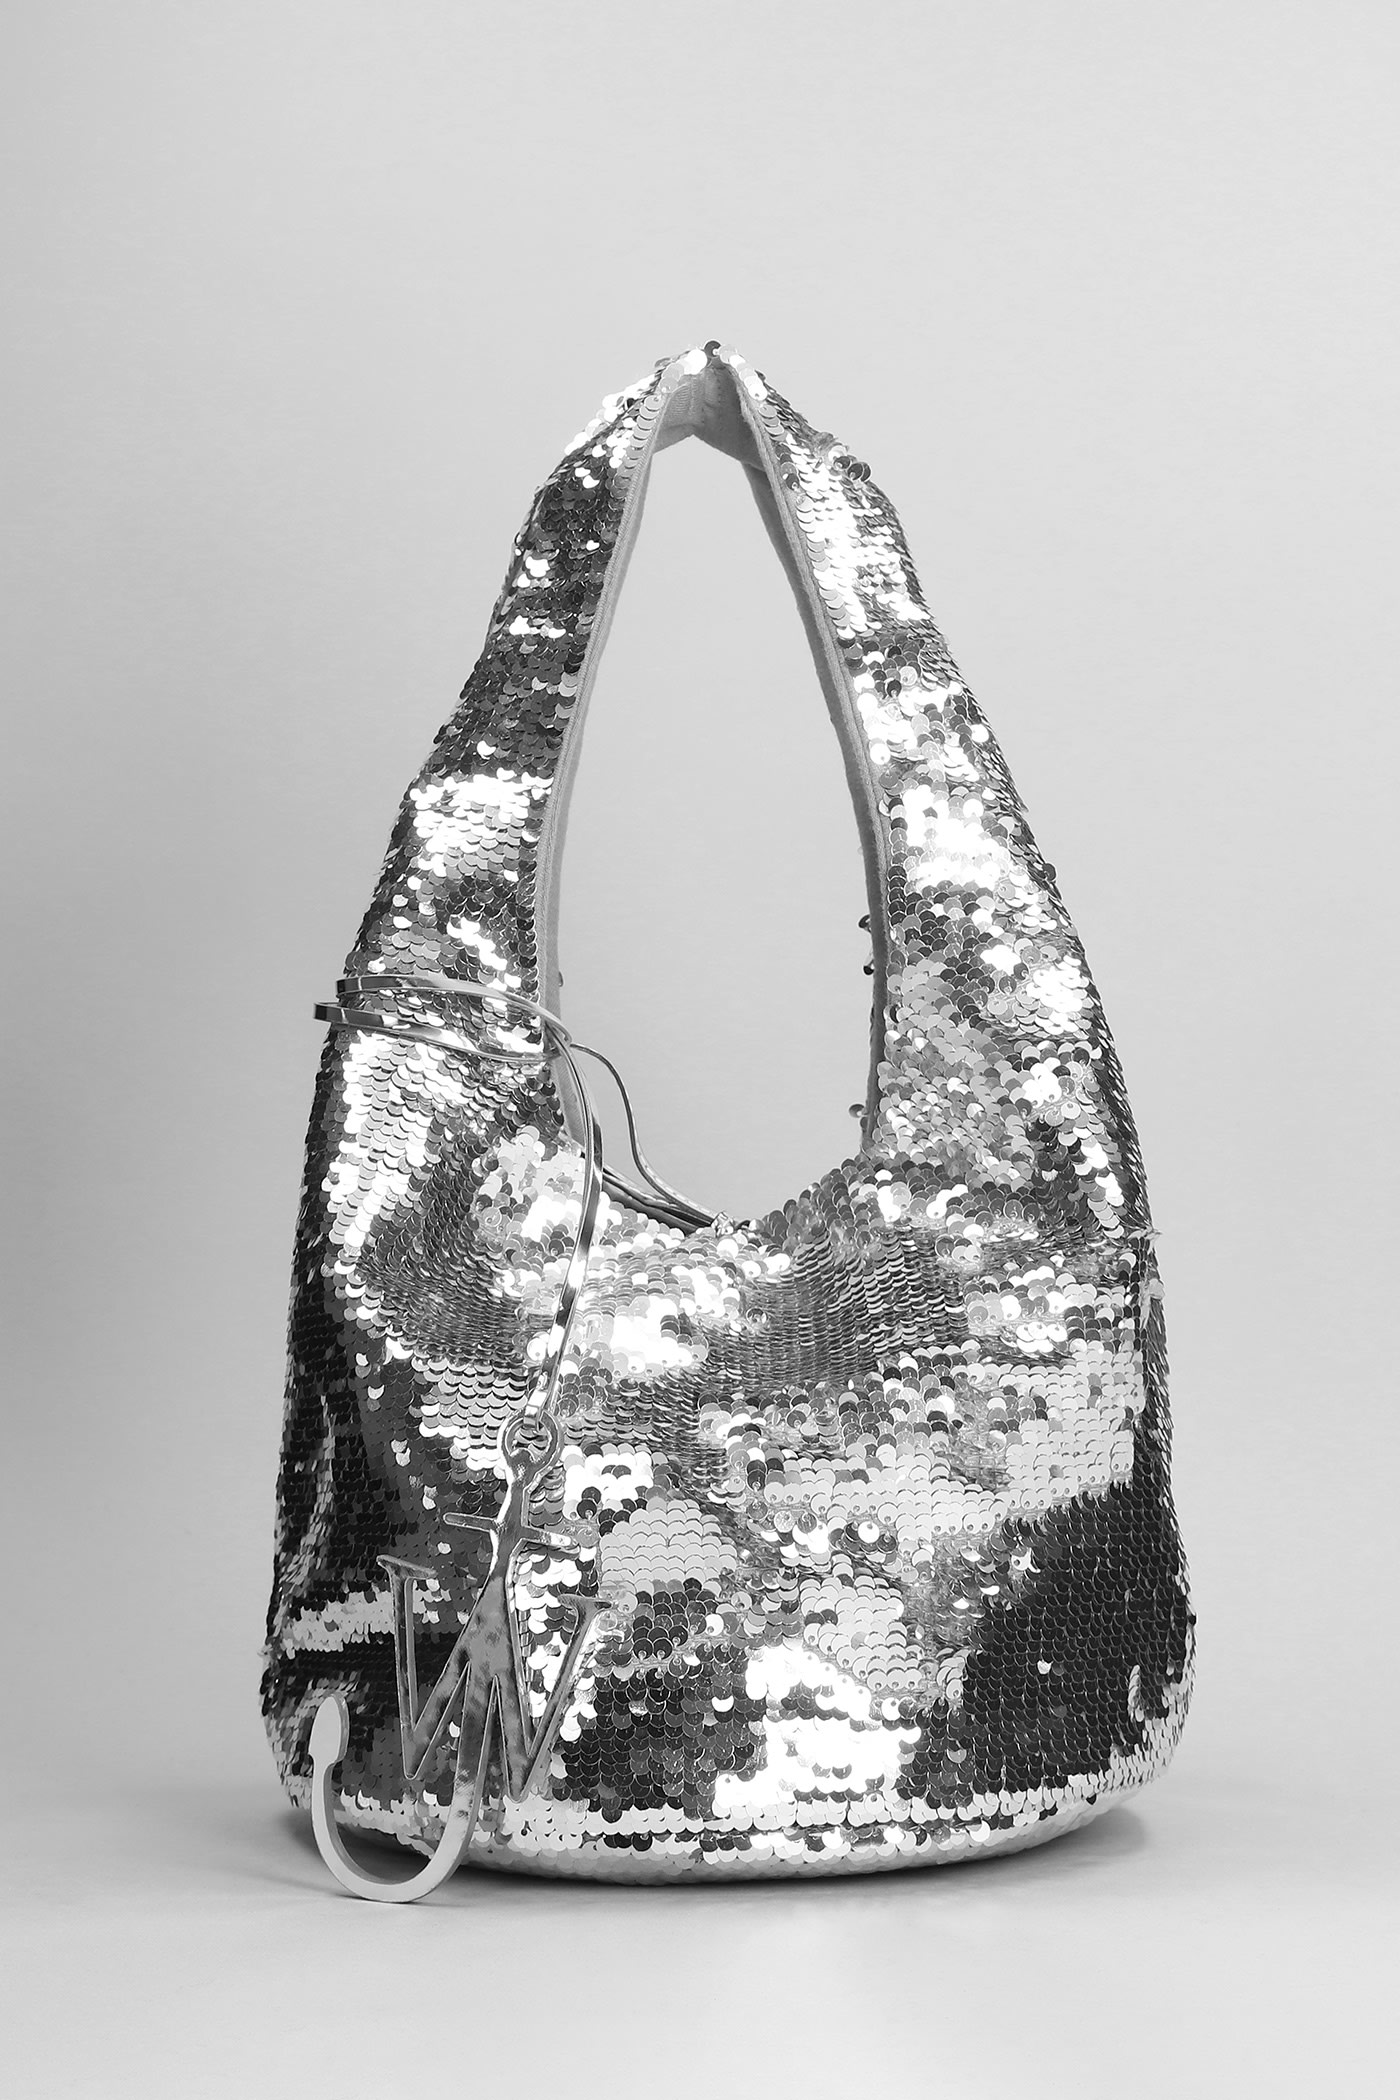 J.W. Anderson Sequin Hand Bag In Silver Pvc